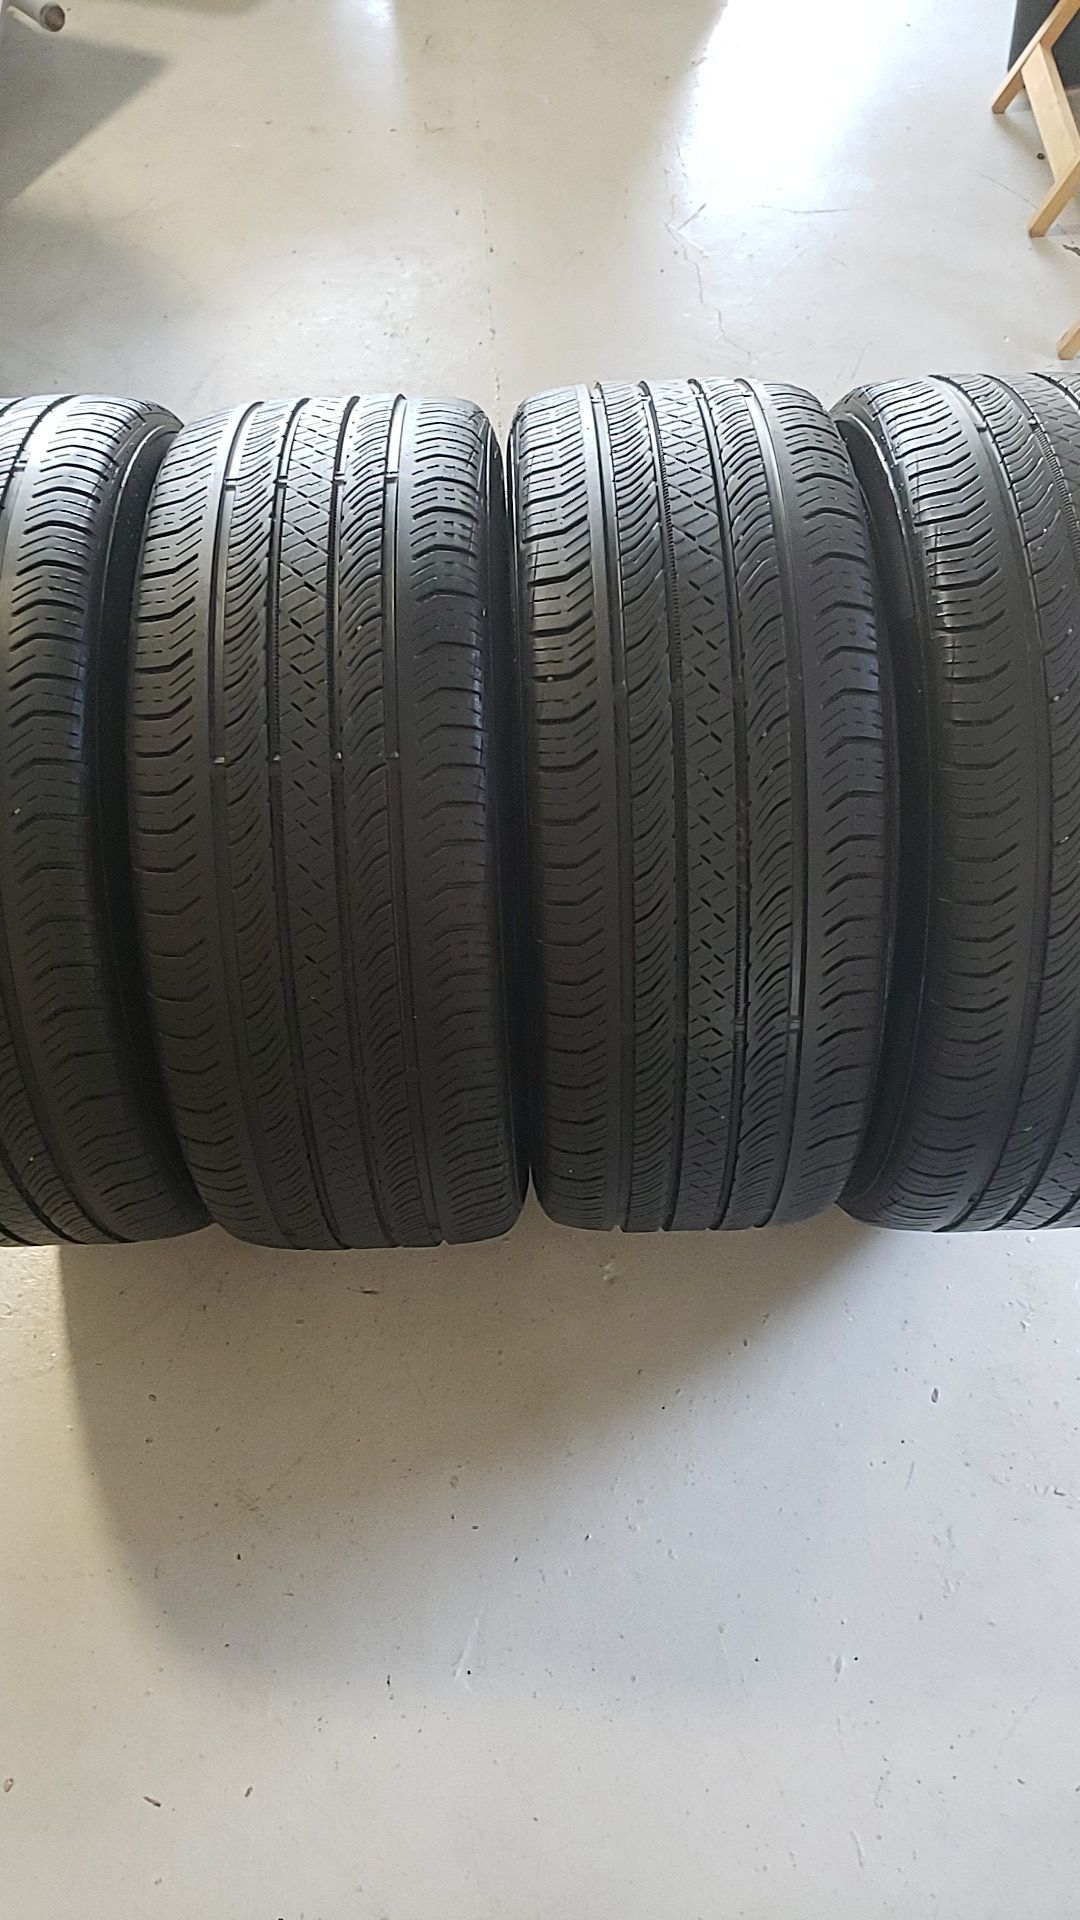 Continental in good condition 4 tires 235 45 18 70% tread